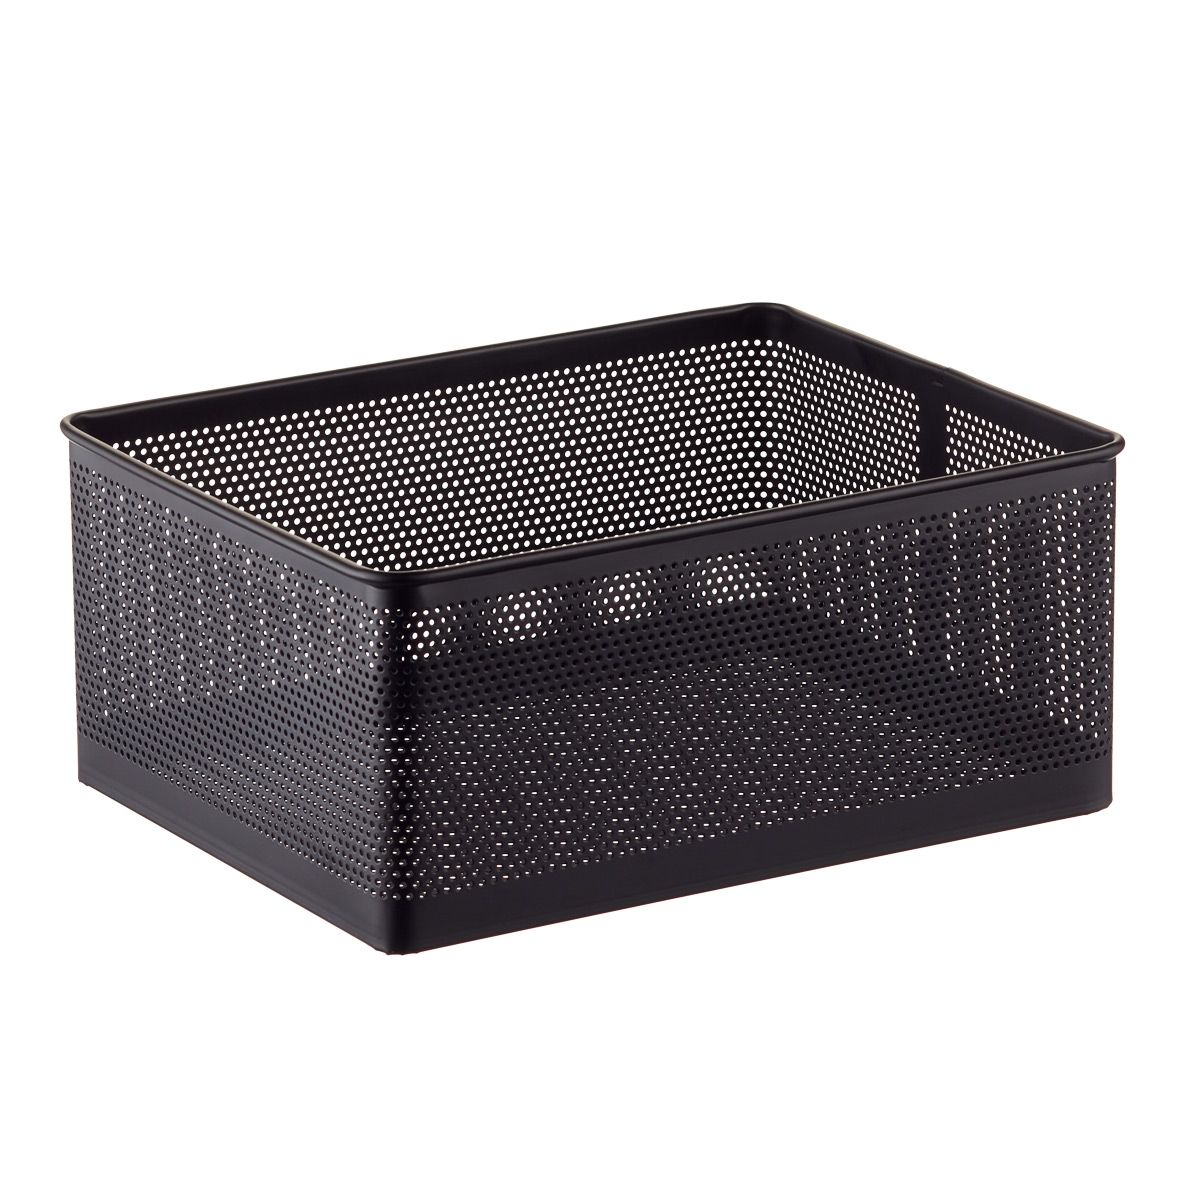 The Container Store Wide Serena Stamped Metal Bin Black | The Container Store